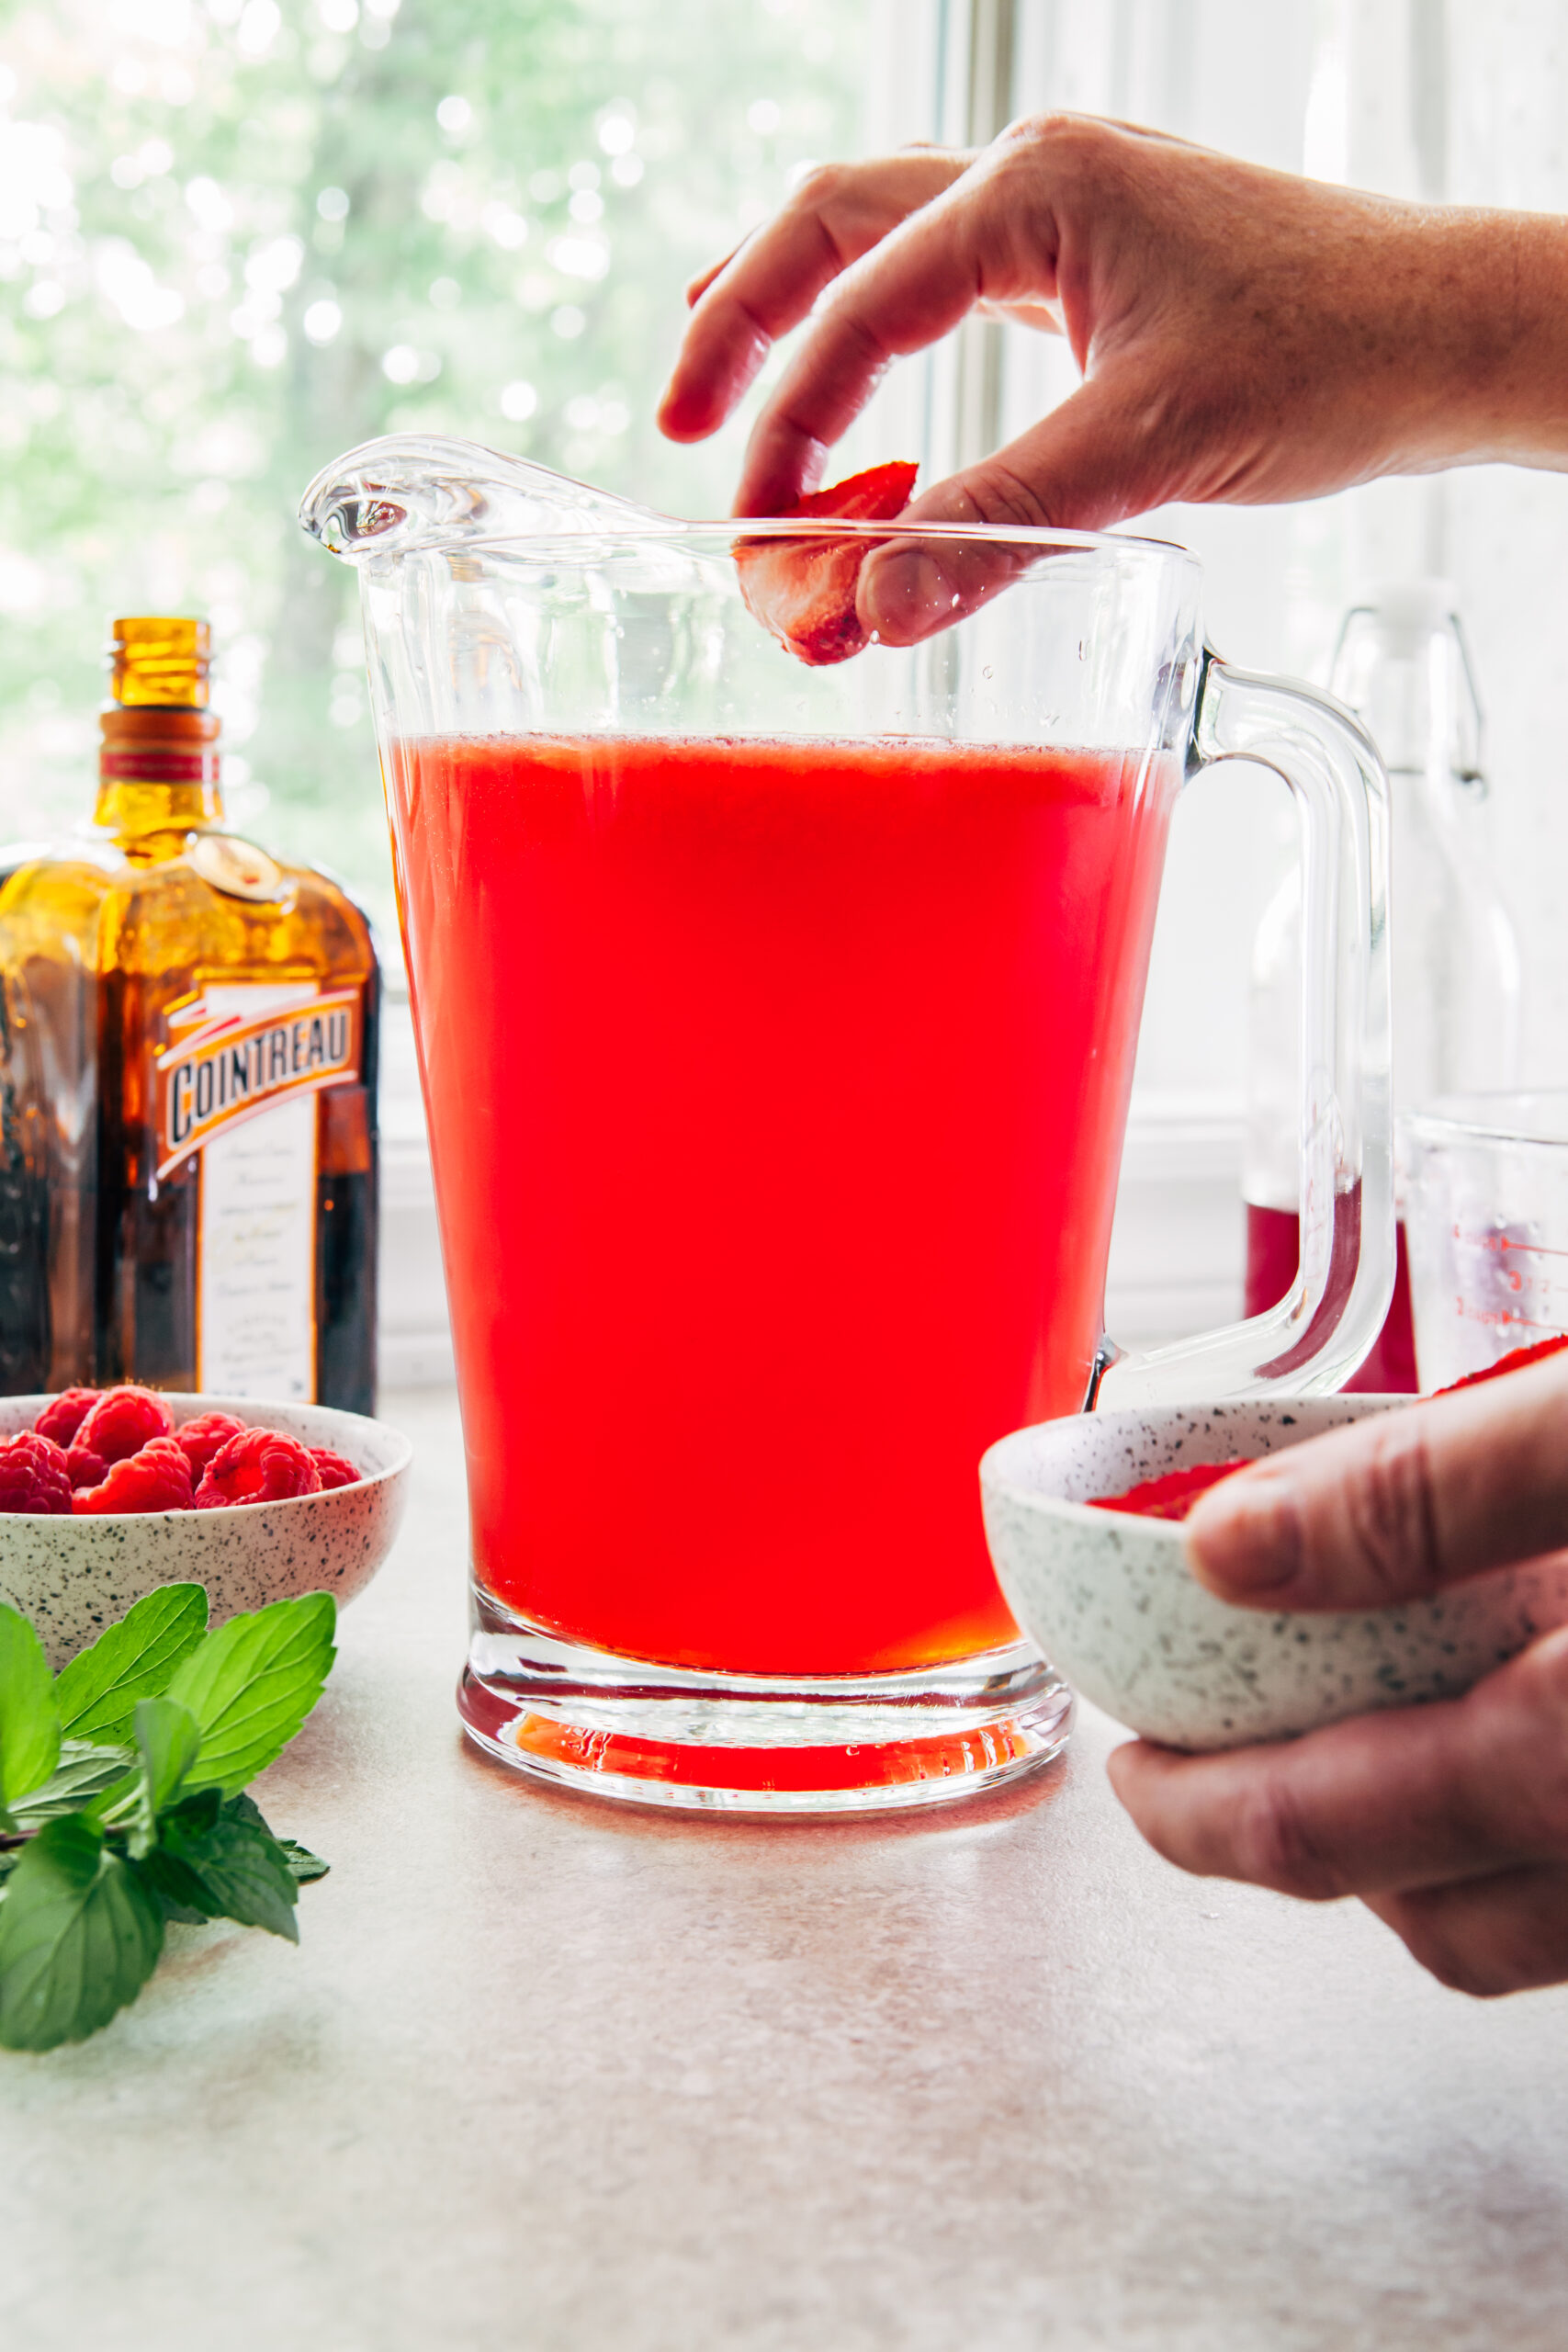 A woman's hand adding a sliced strawberry to a glass pitcher filled with sangria.